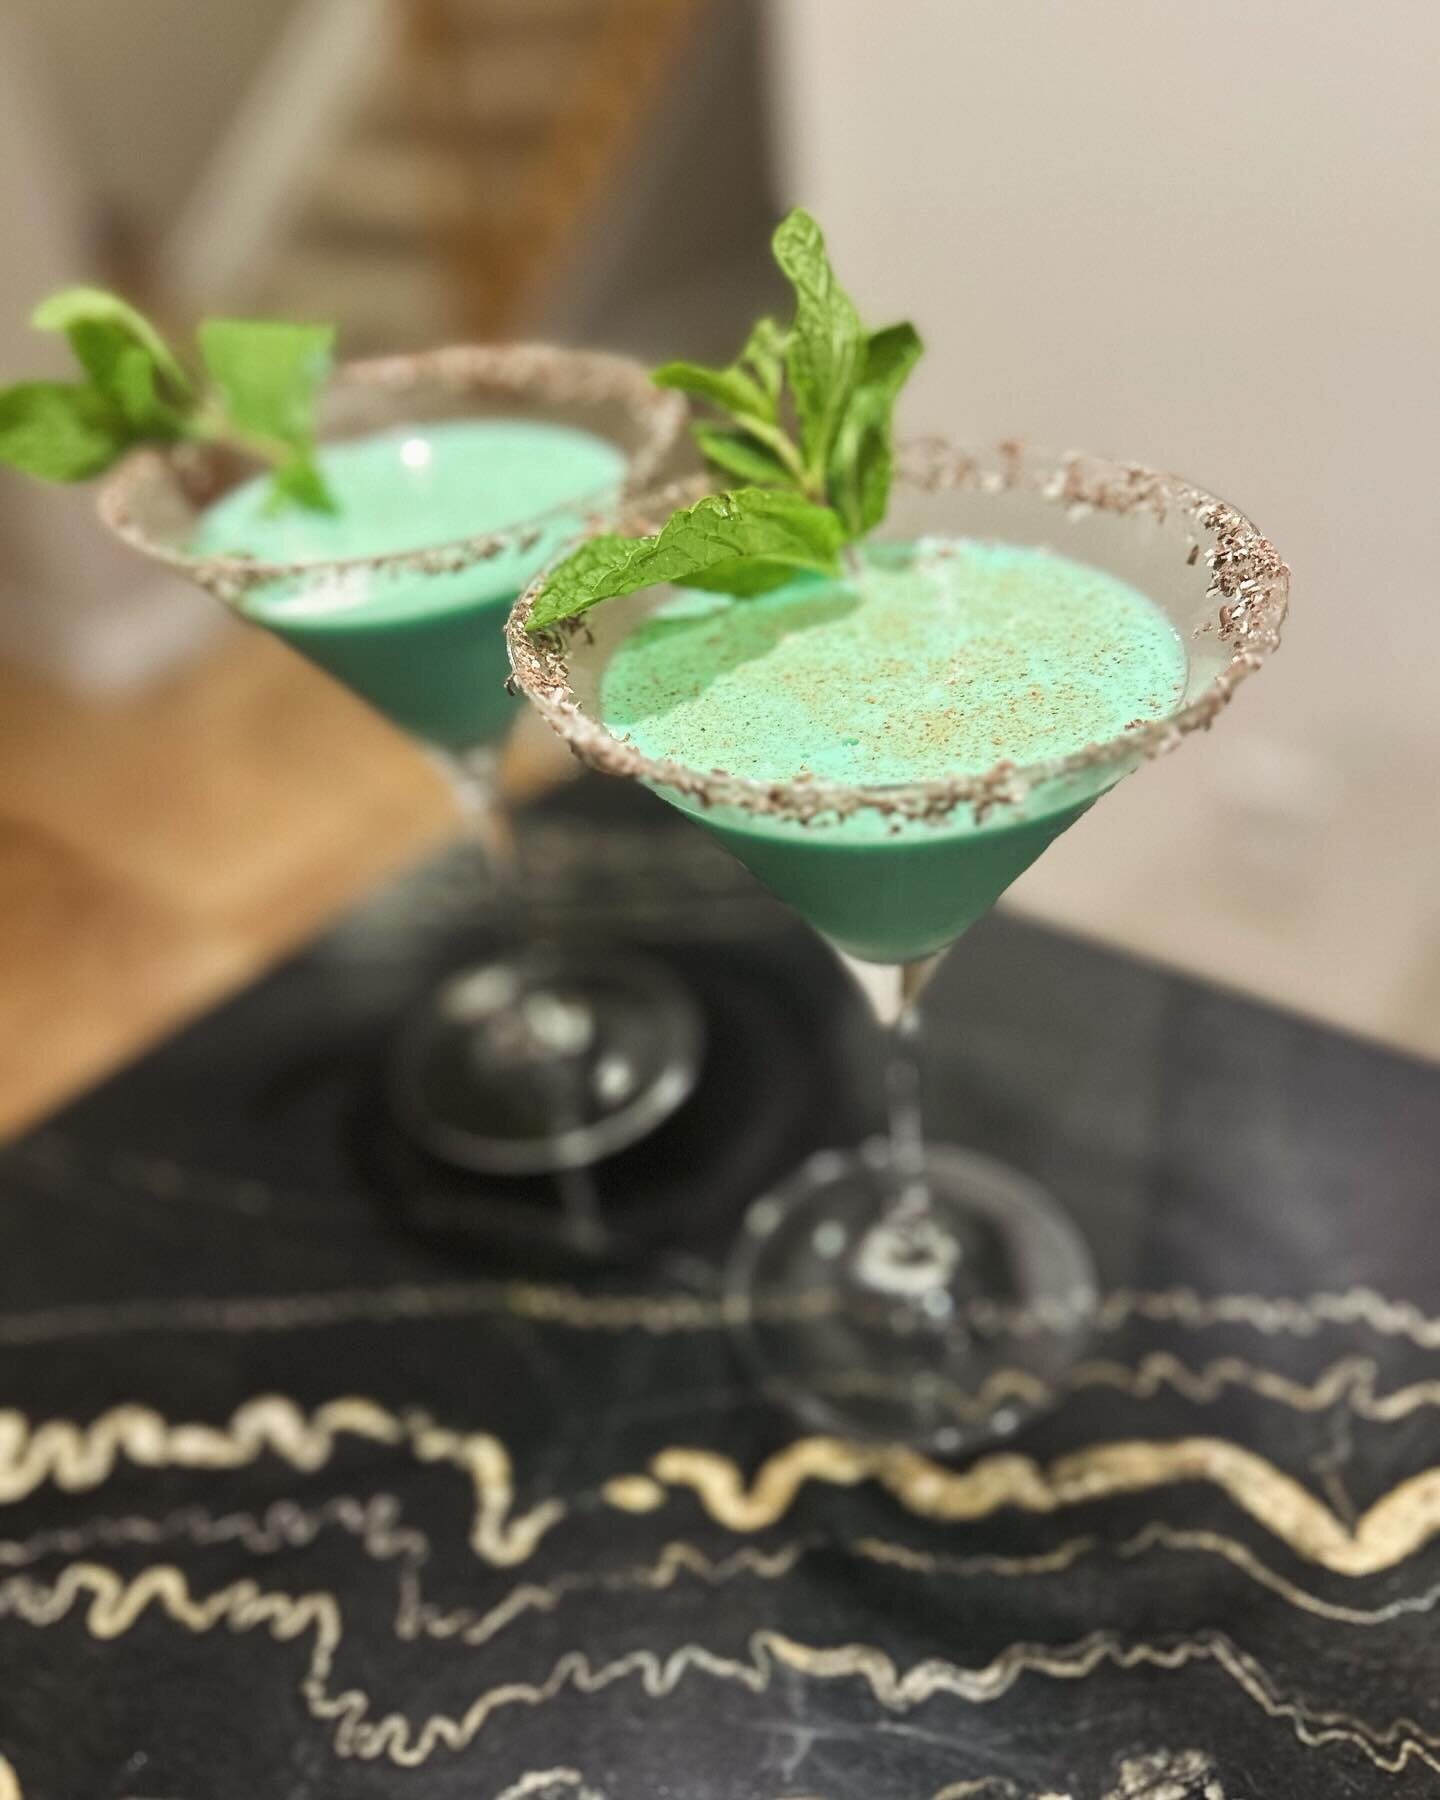 Preparing for the holiday season. 
🍸 🥃 🎄 

1) Grasshopper: creme de menthe, creme de cacao, half and half, garnished with mint leaf and nutmeg with Andes mint shavings rim 

2) The &lsquo;Happy Howie-Days&rsquo; (after our #norwichterrier) : bourb